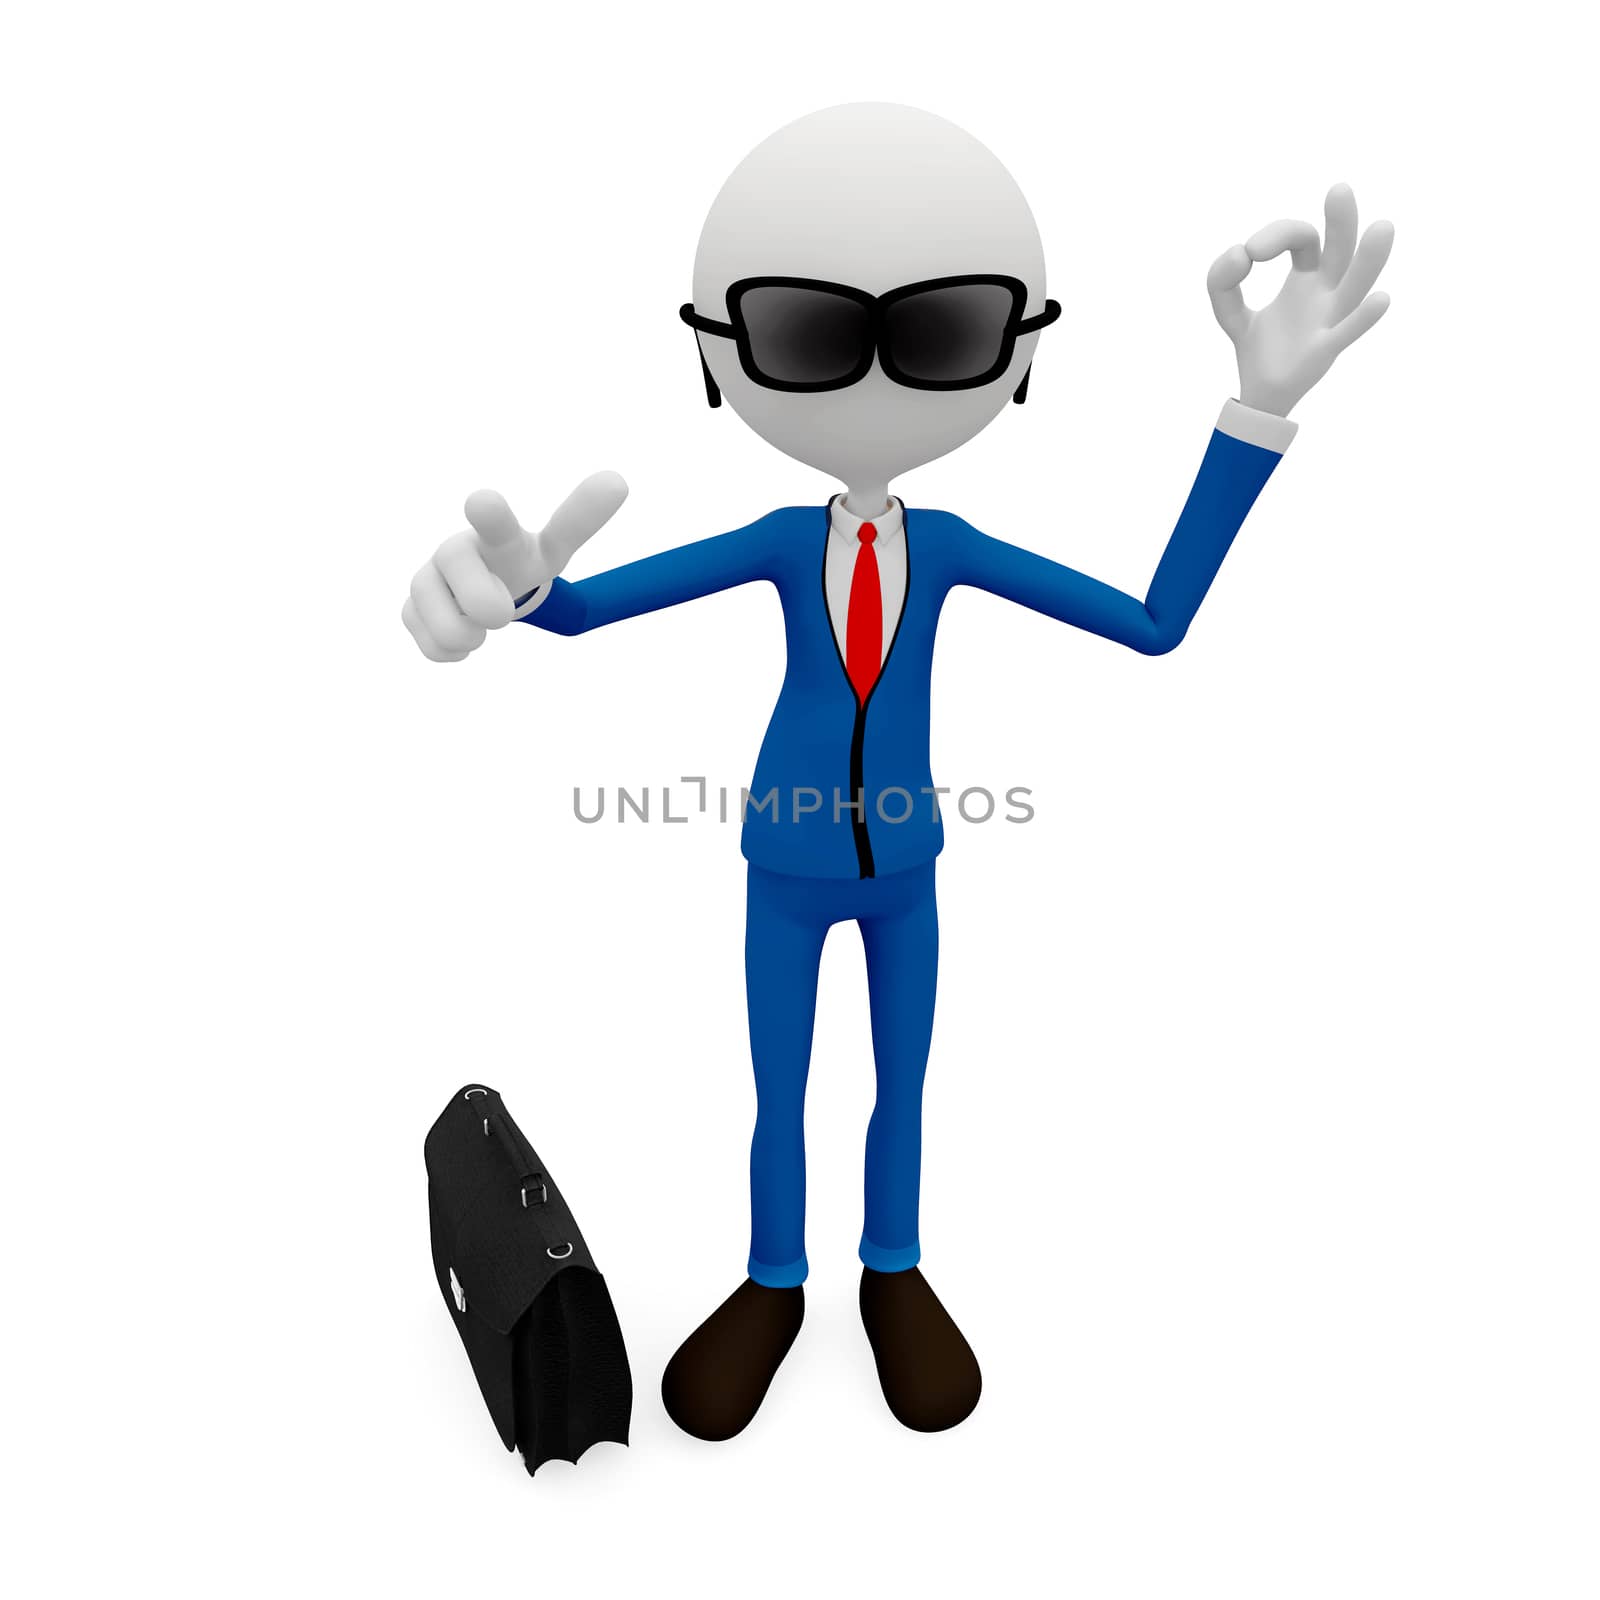 3D Man and Business - This businessman is successful